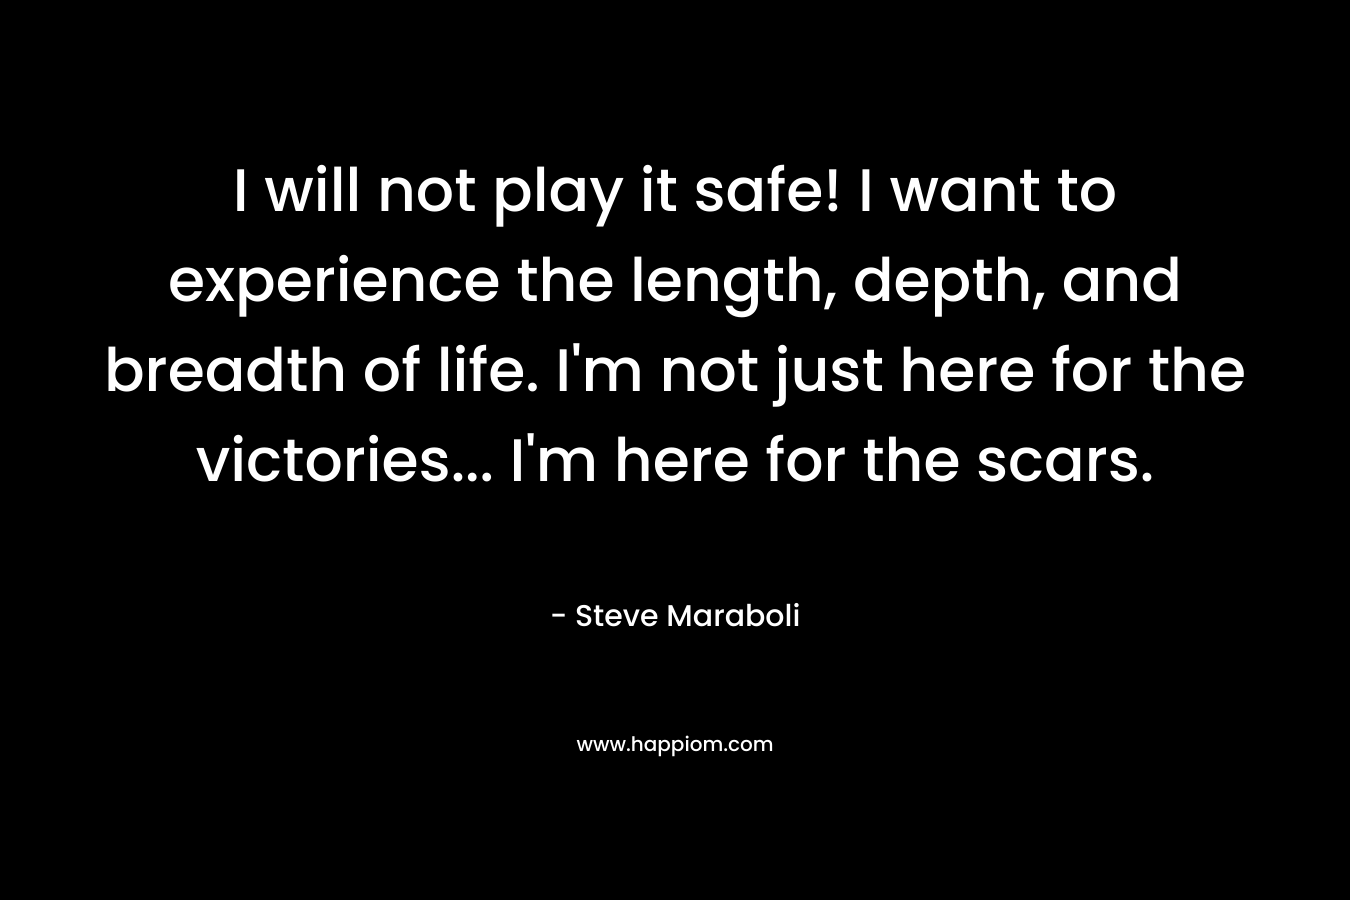 I will not play it safe! I want to experience the length, depth, and breadth of life. I'm not just here for the victories... I'm here for the scars.